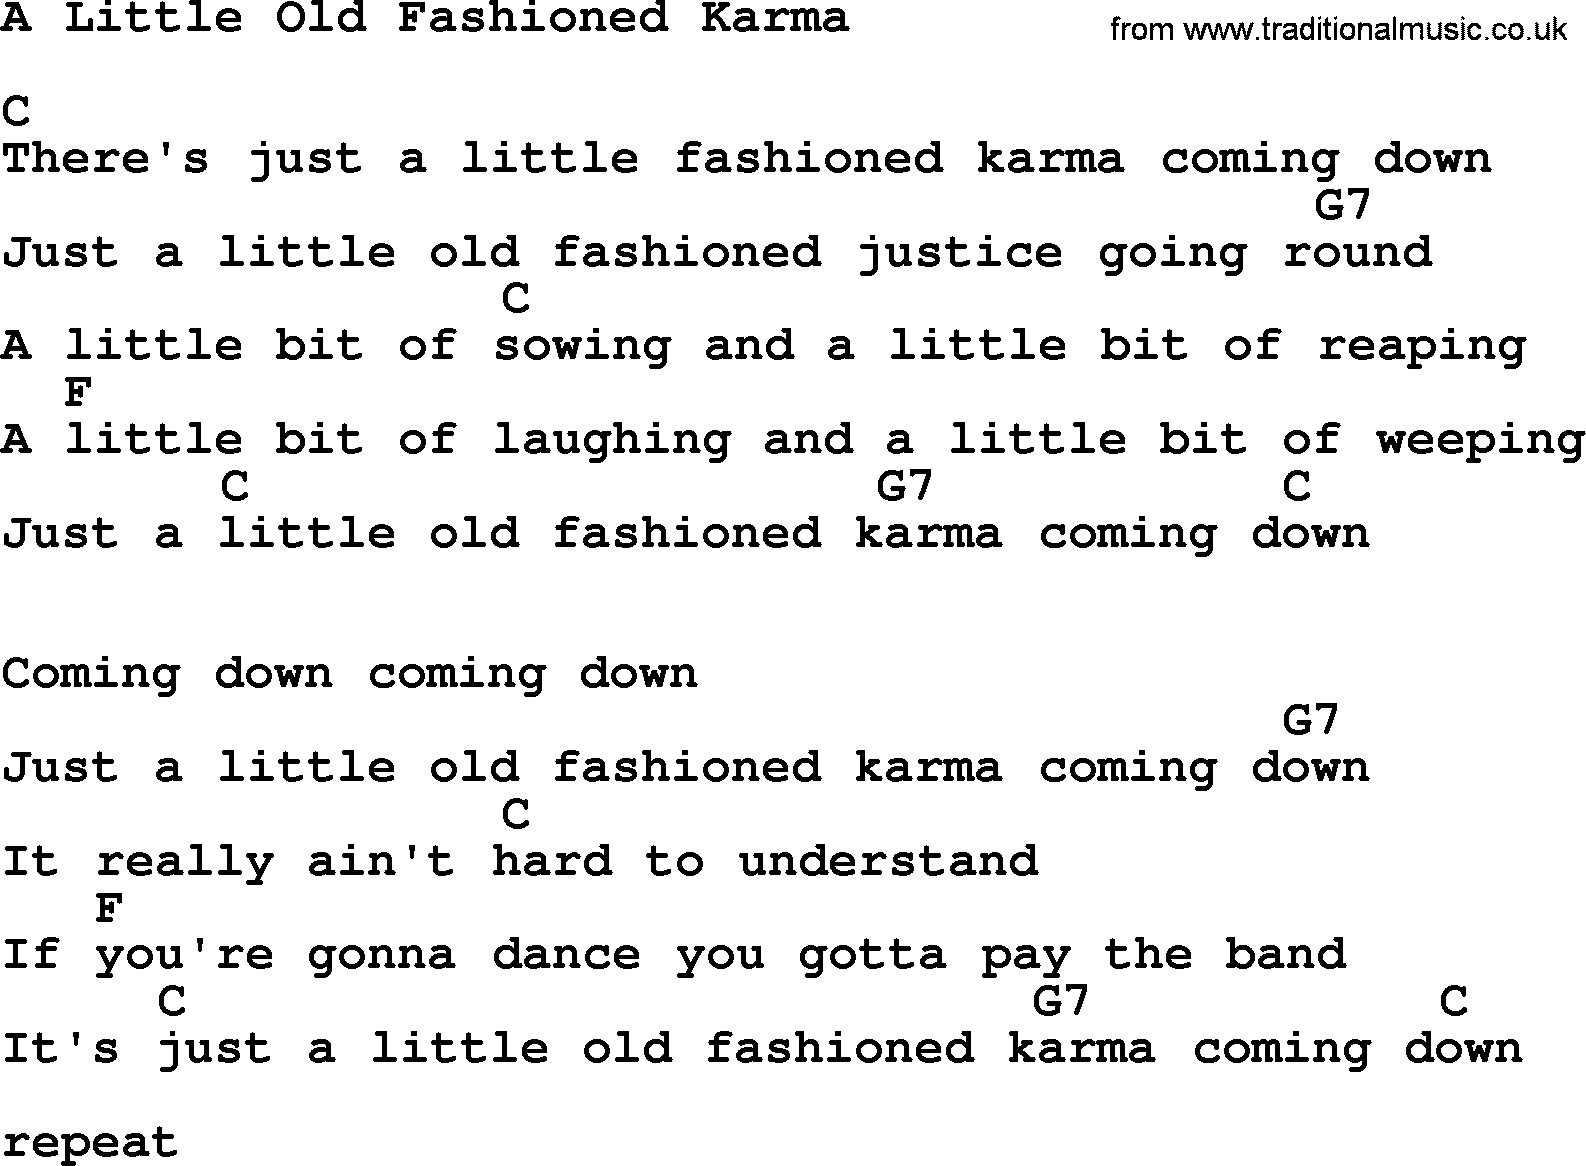 Willie Nelson song: A Little Old Fashioned Karma, lyrics and chords